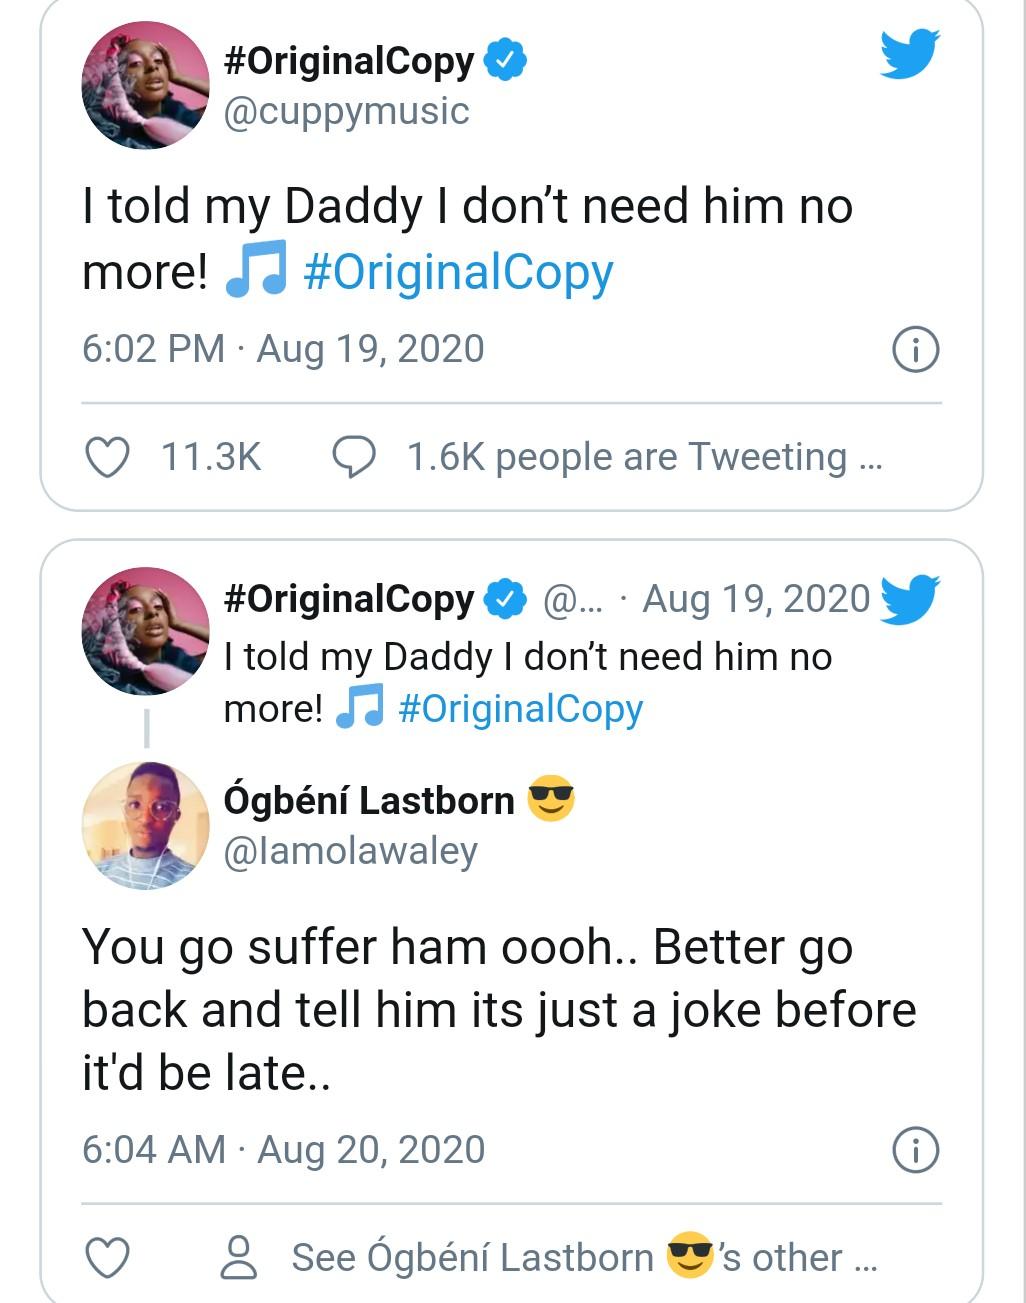 I told my daddy I dont need him no more – DJ Cuppy2 The Untame News “I told my daddy I don’t need him no more” – DJ Cuppy